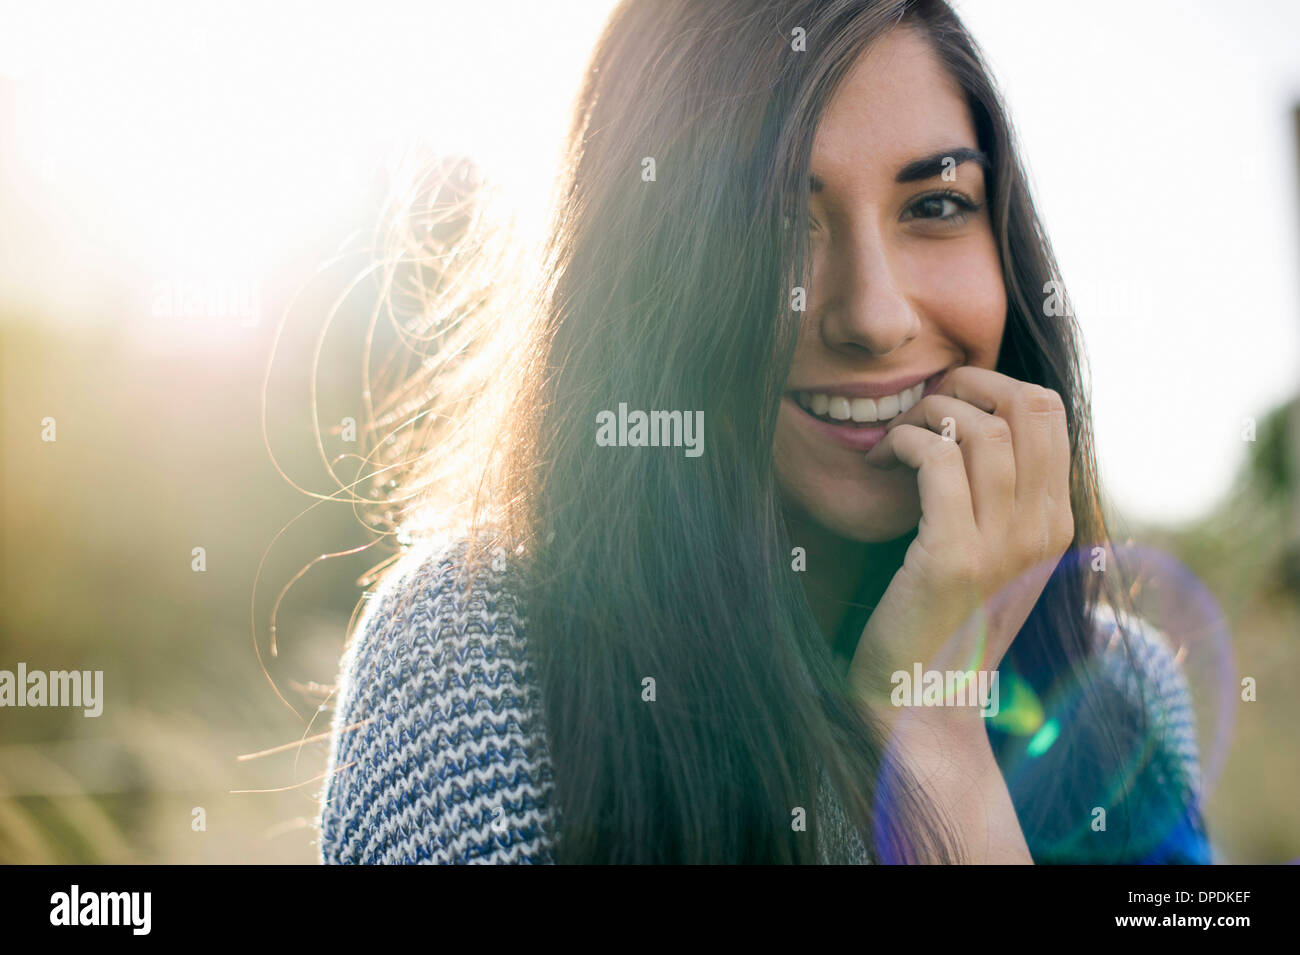 Portrait of young woman with long brown hair, smiling Stock Photo